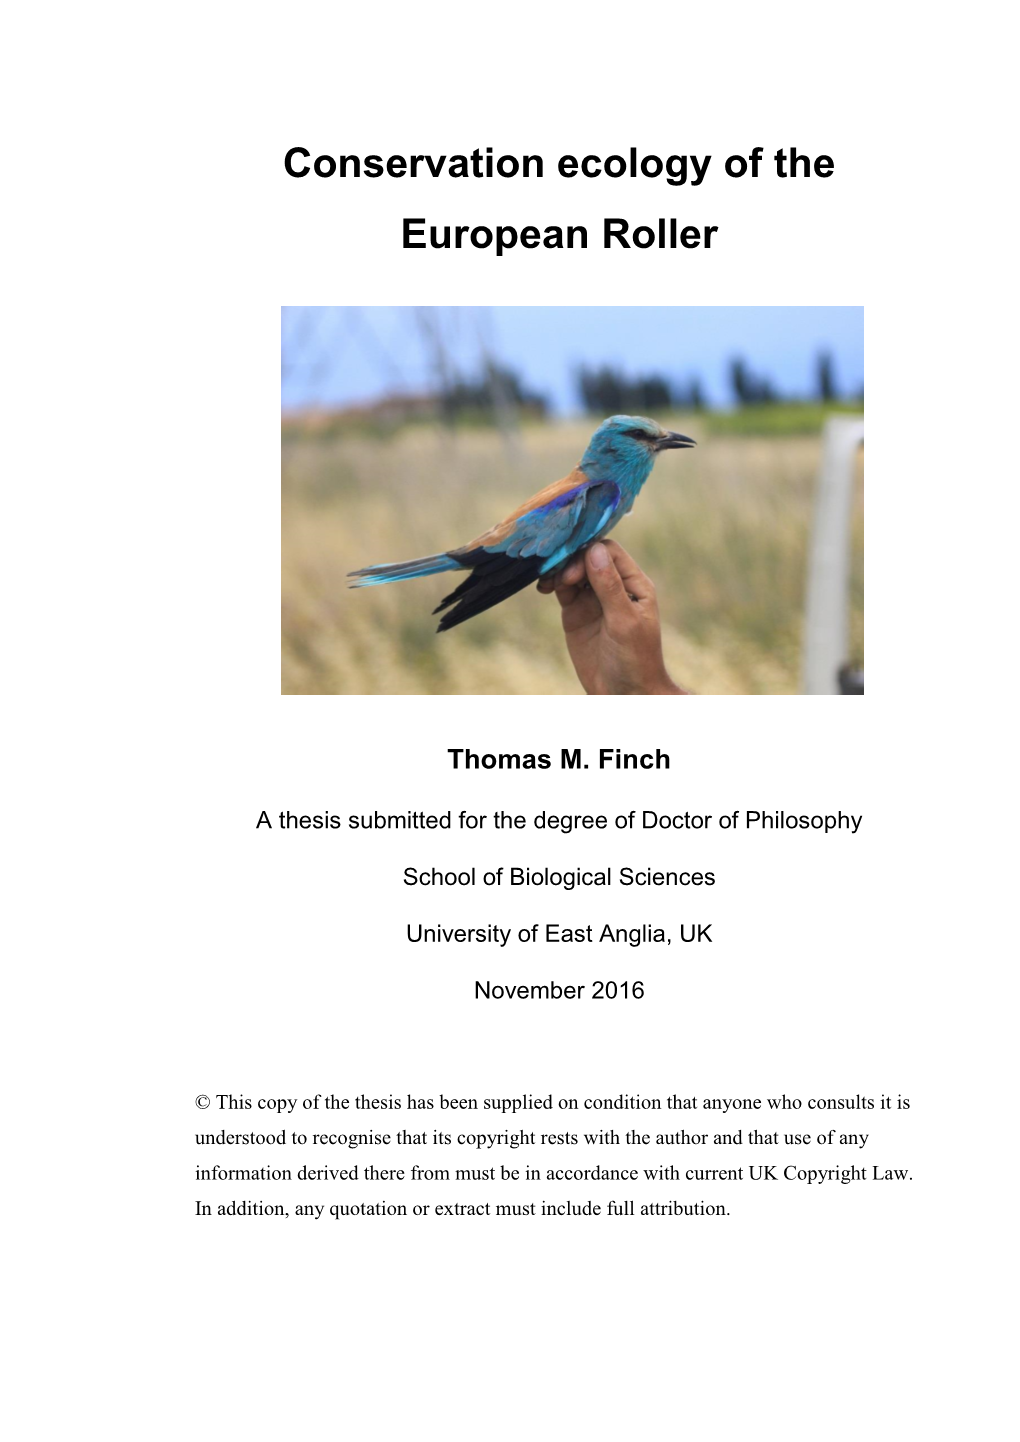 Conservation Ecology of the European Roller